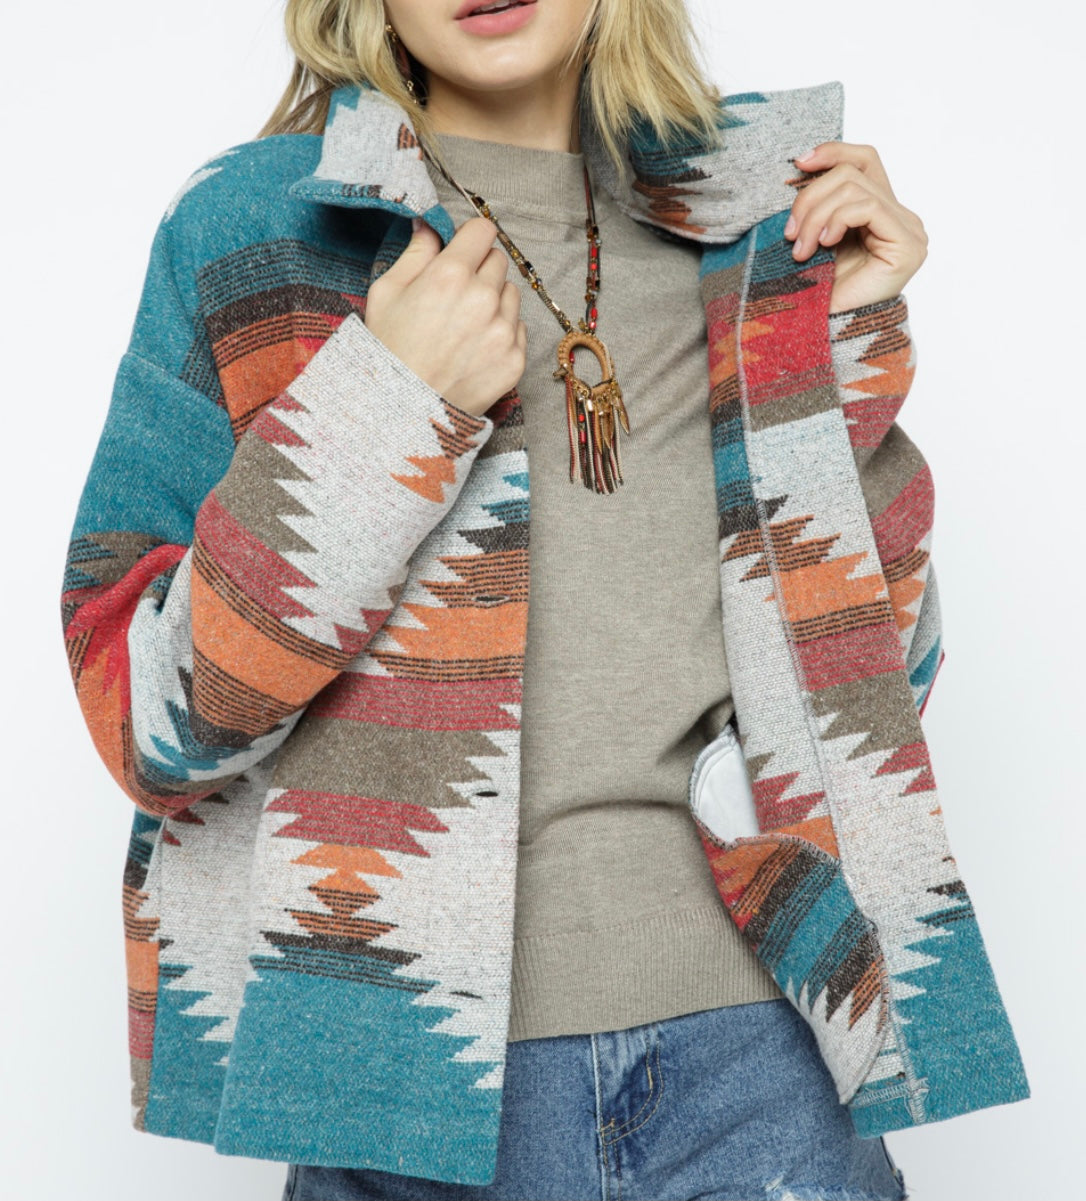 Out West Aztec shacket